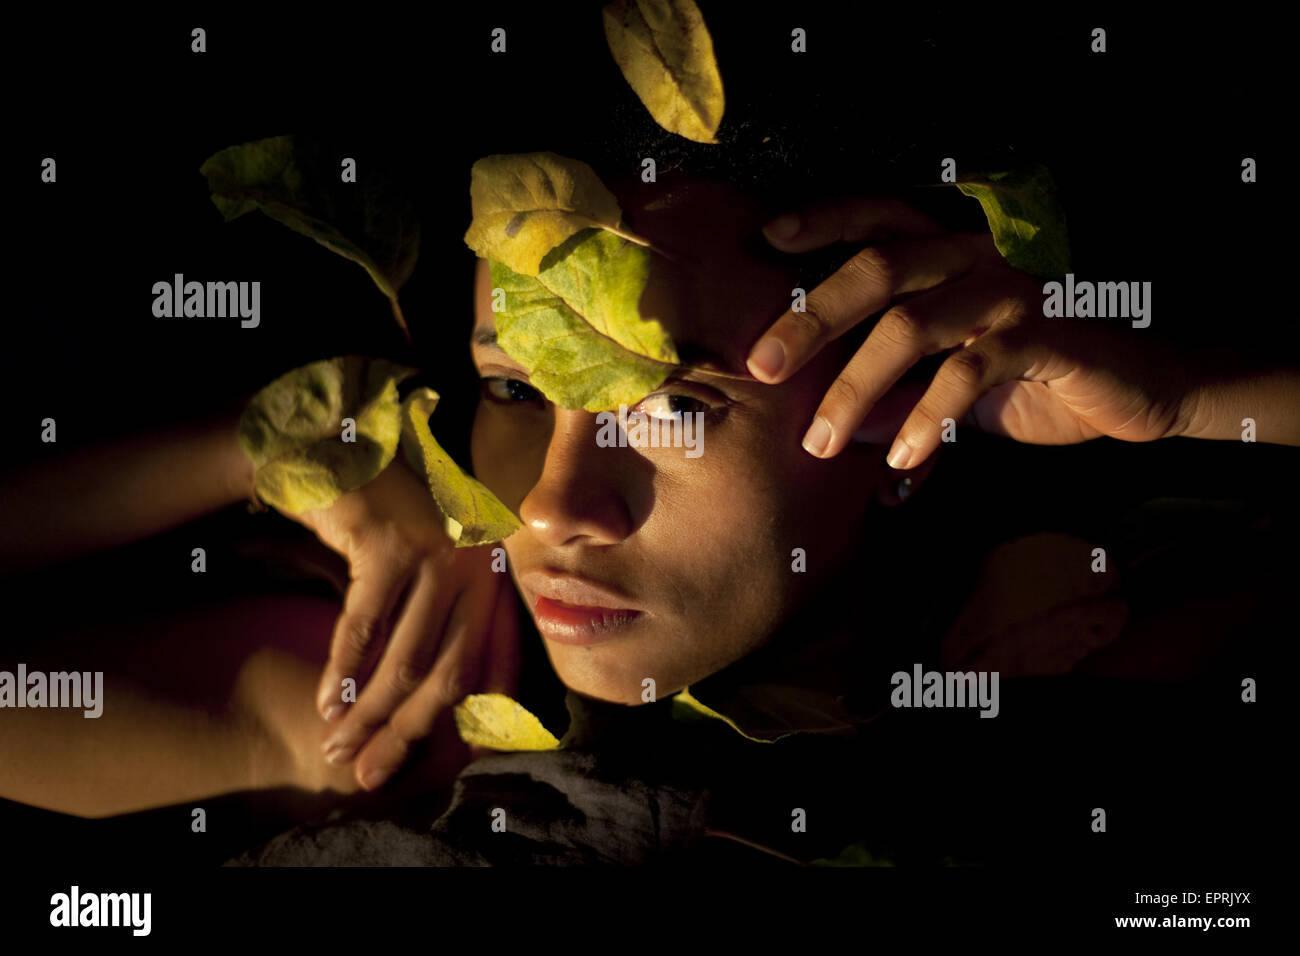 A young woman photographed photographed peering out from behind leaves in Baltimore, Maryland on December 1. Stock Photo